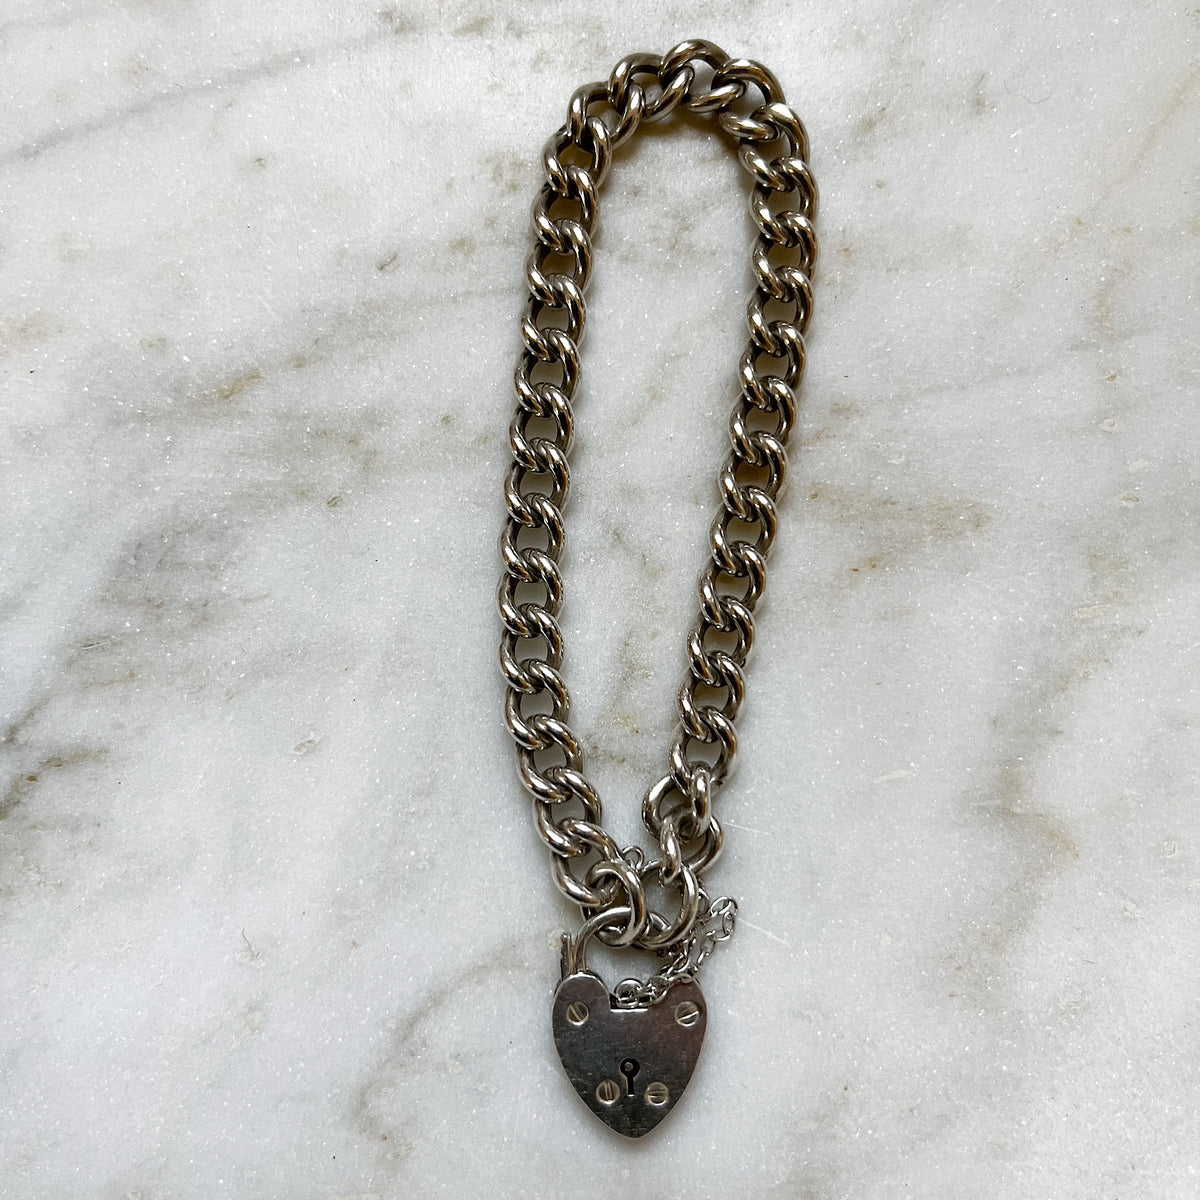 Antique Pocket Watch Chain Bracelet With Heart